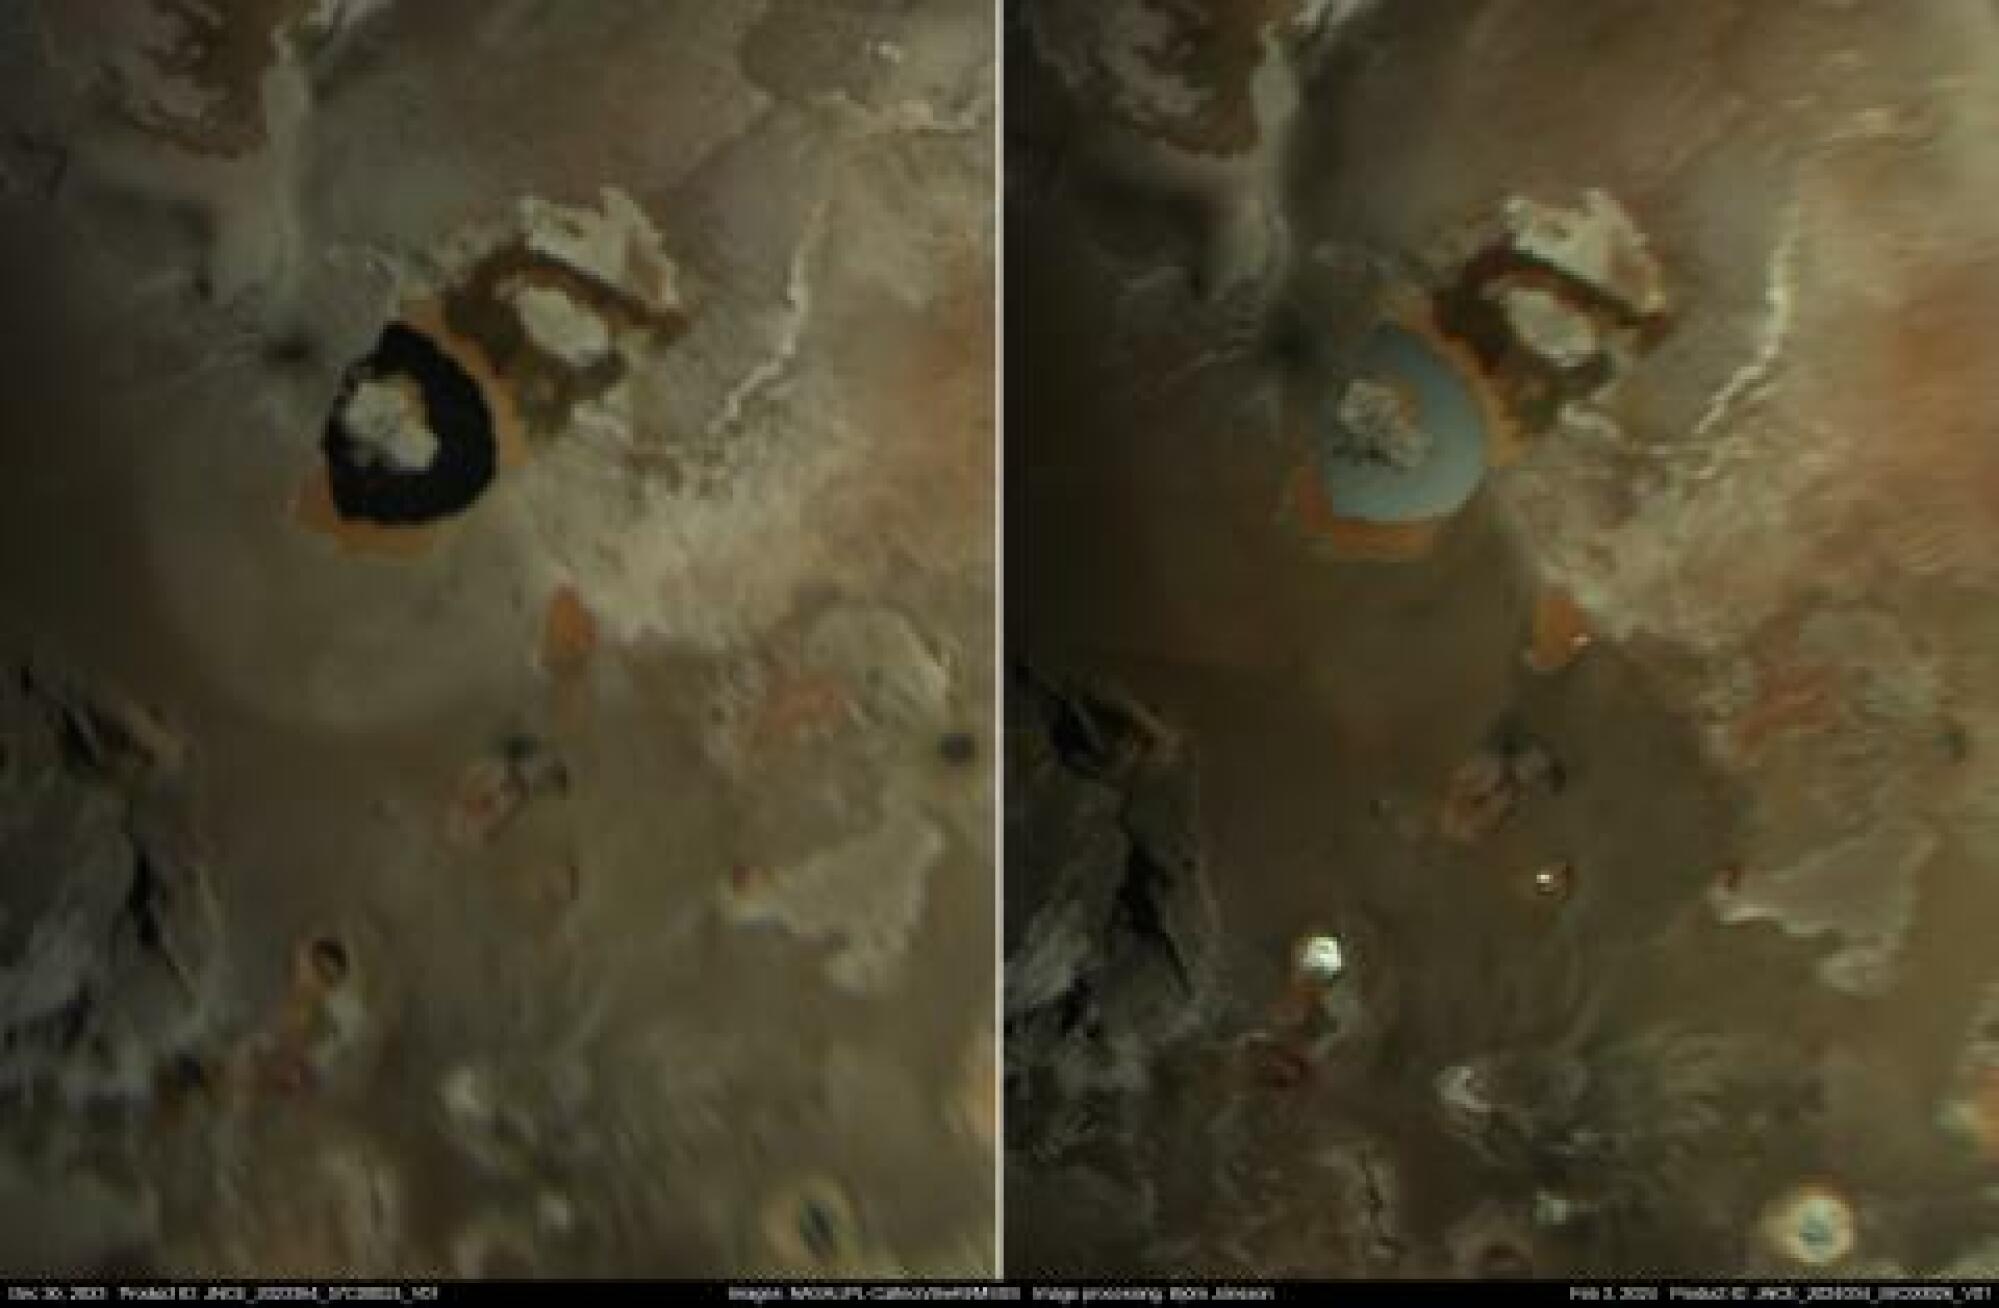 Close-up views of Loki Patera, the horseshoe-shaped feature on the left in both images.